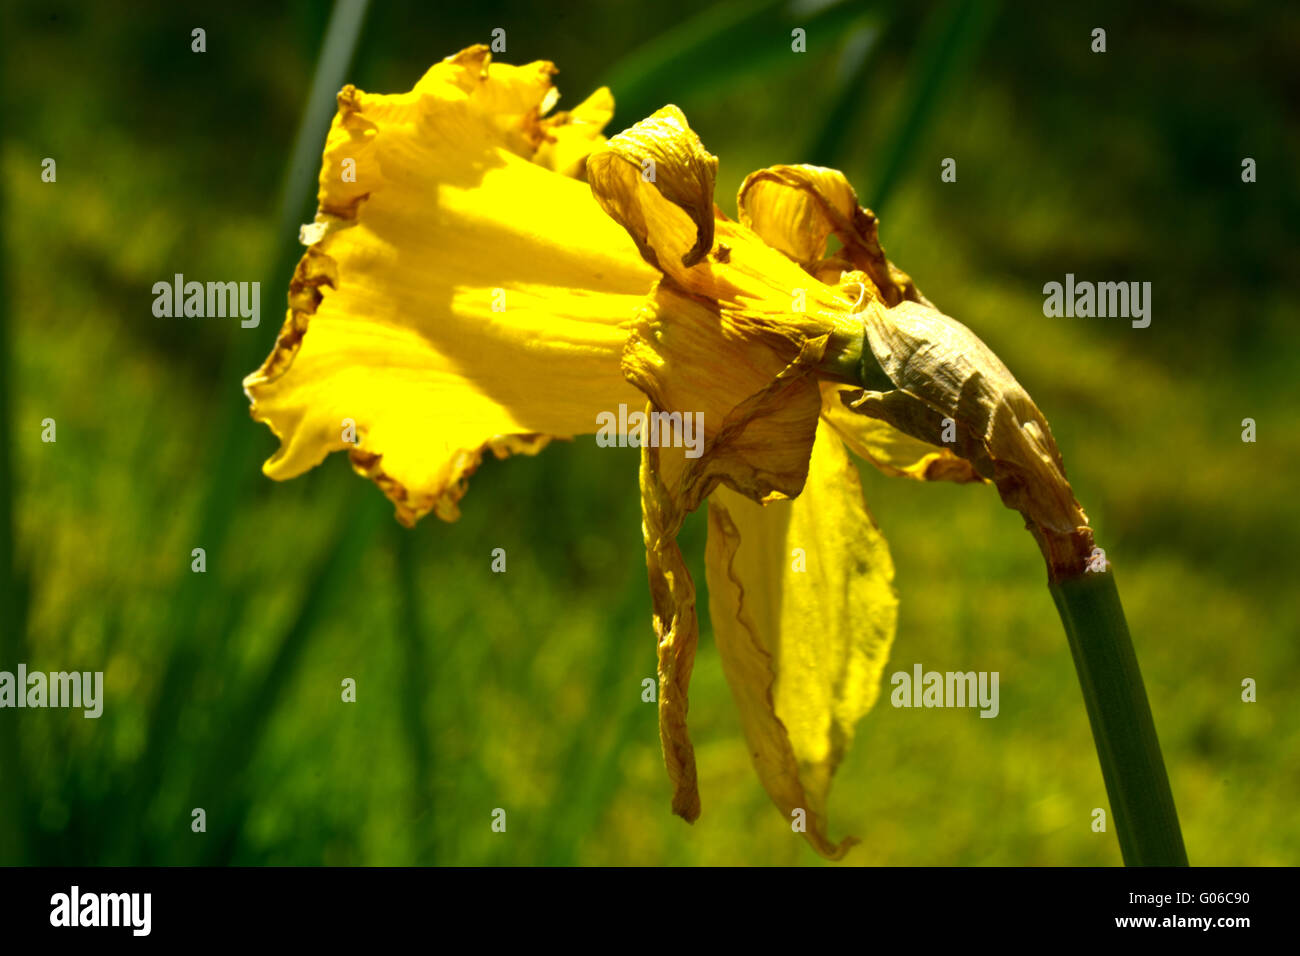 Daffodil Narcissus flower fading dead Stock Photo